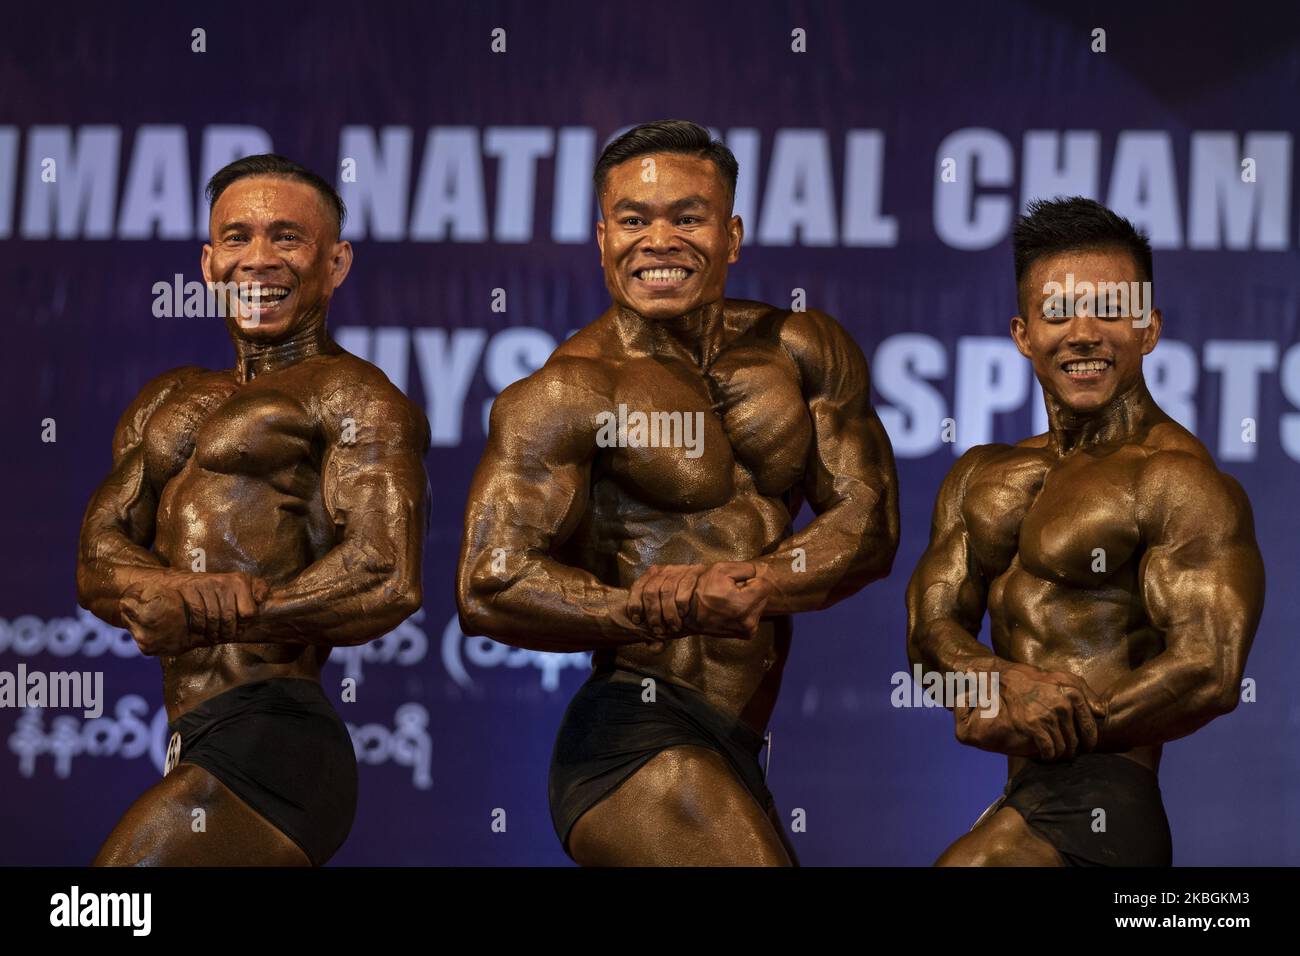 Male bodybuilding athletes compete in the Myanmar National Championship Bodybuilding and Physique Sports Competition in Yangon on February 9, 2020. (Photo by Shwe Paw Mya Tin/NurPhoto) Stock Photo